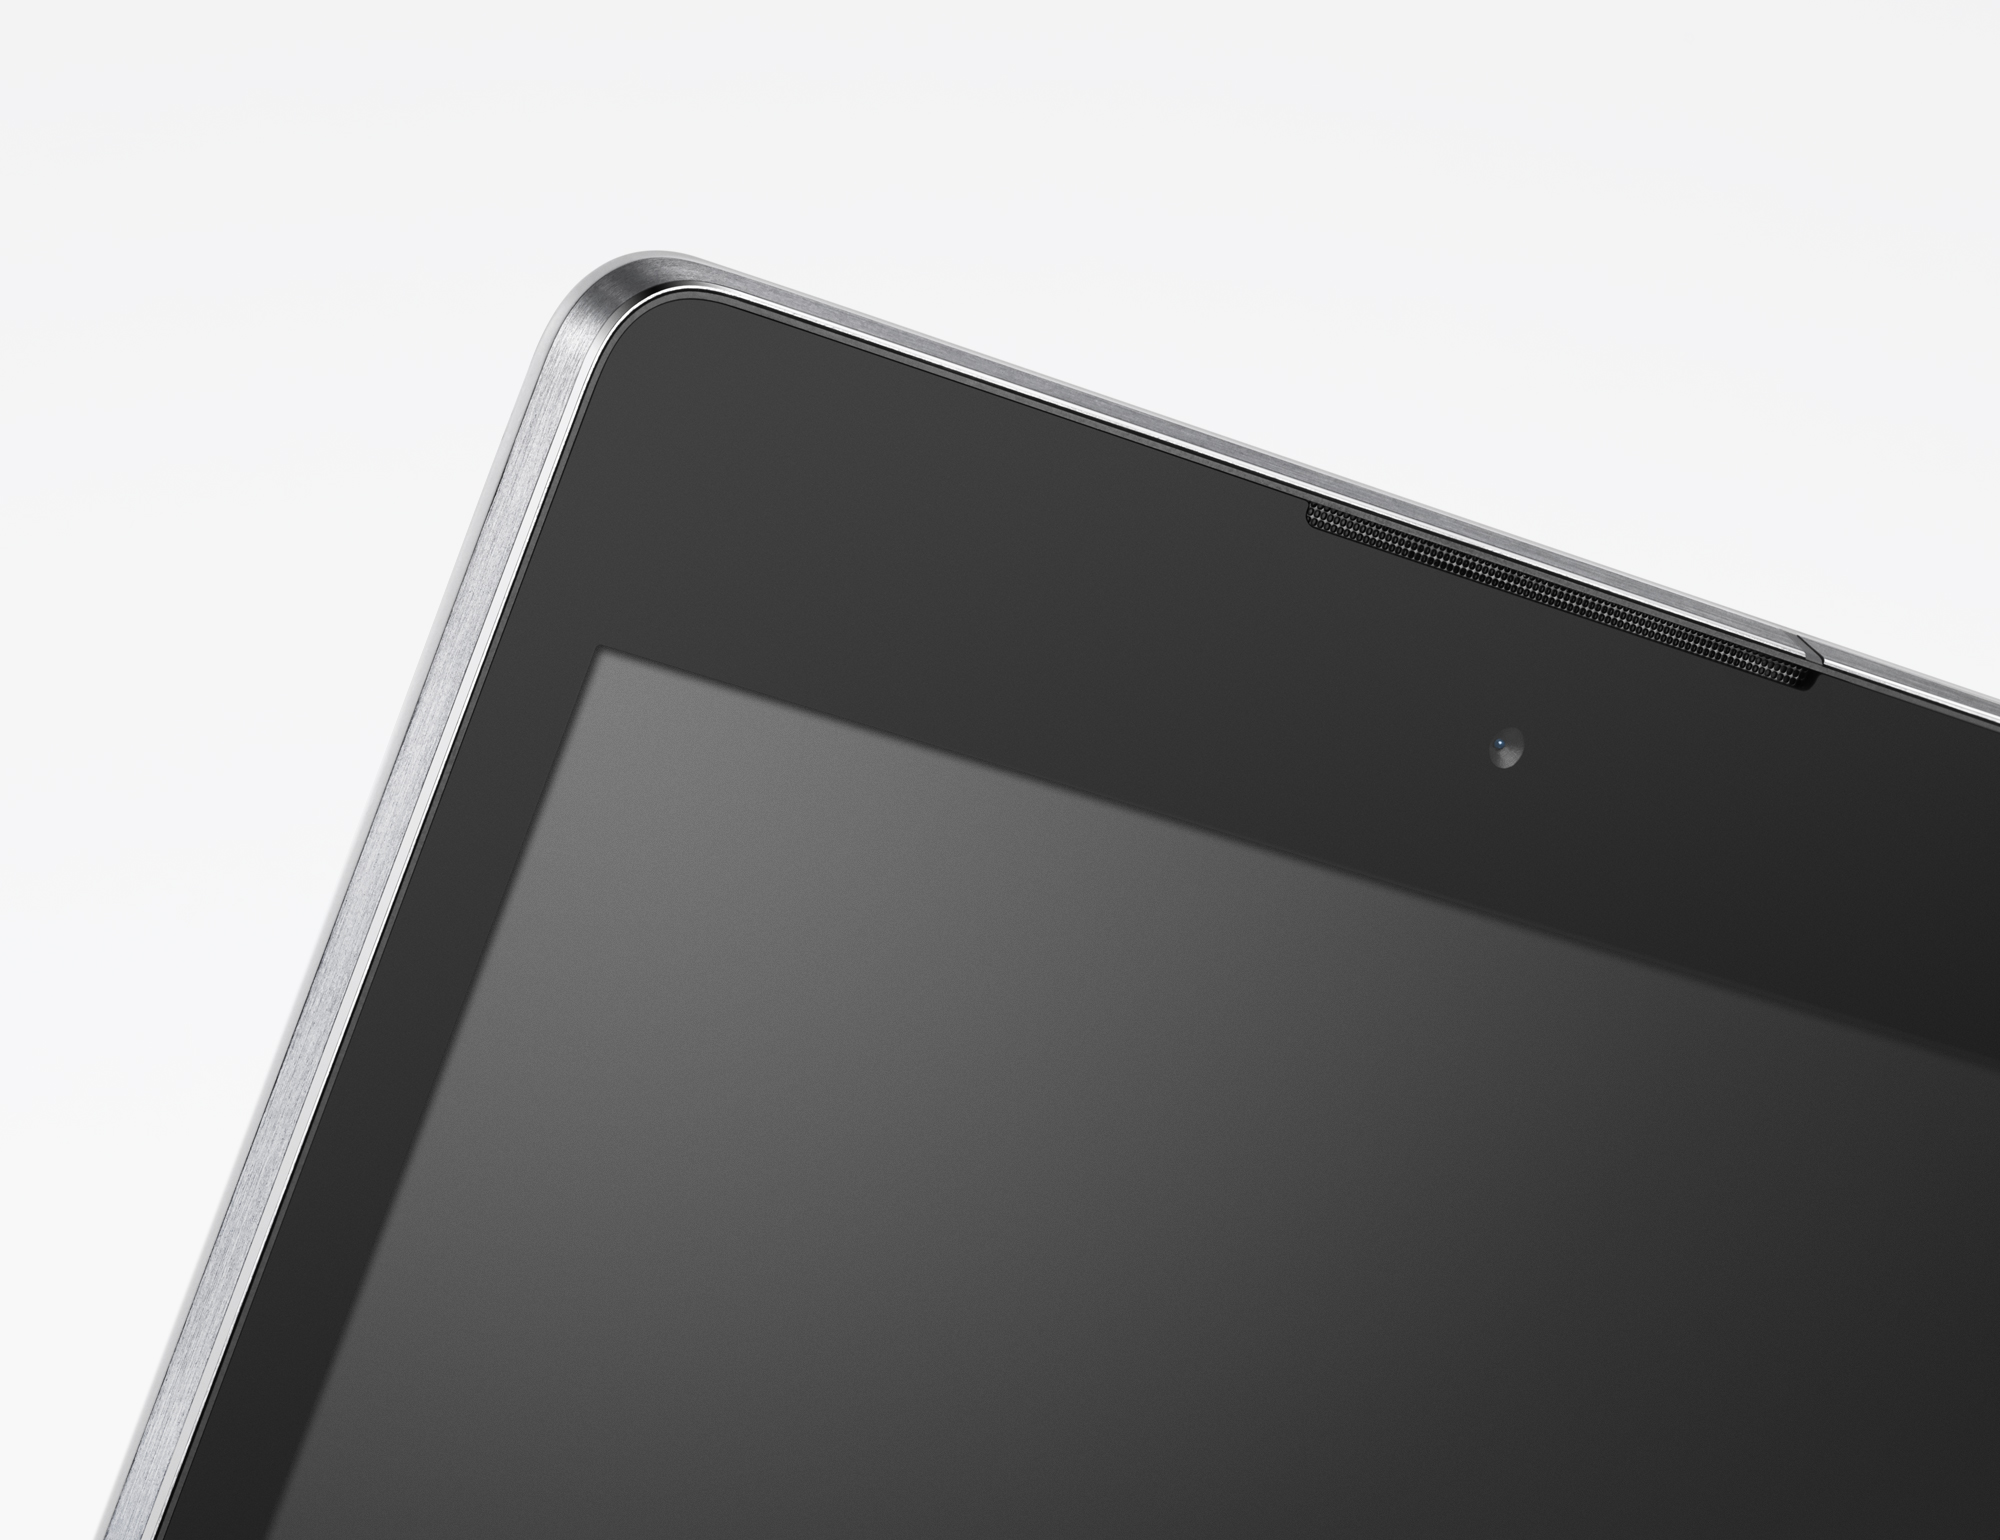 N9 grid2 l - Google Makes the HTC made Nexus 9 running Android Lollipop Official